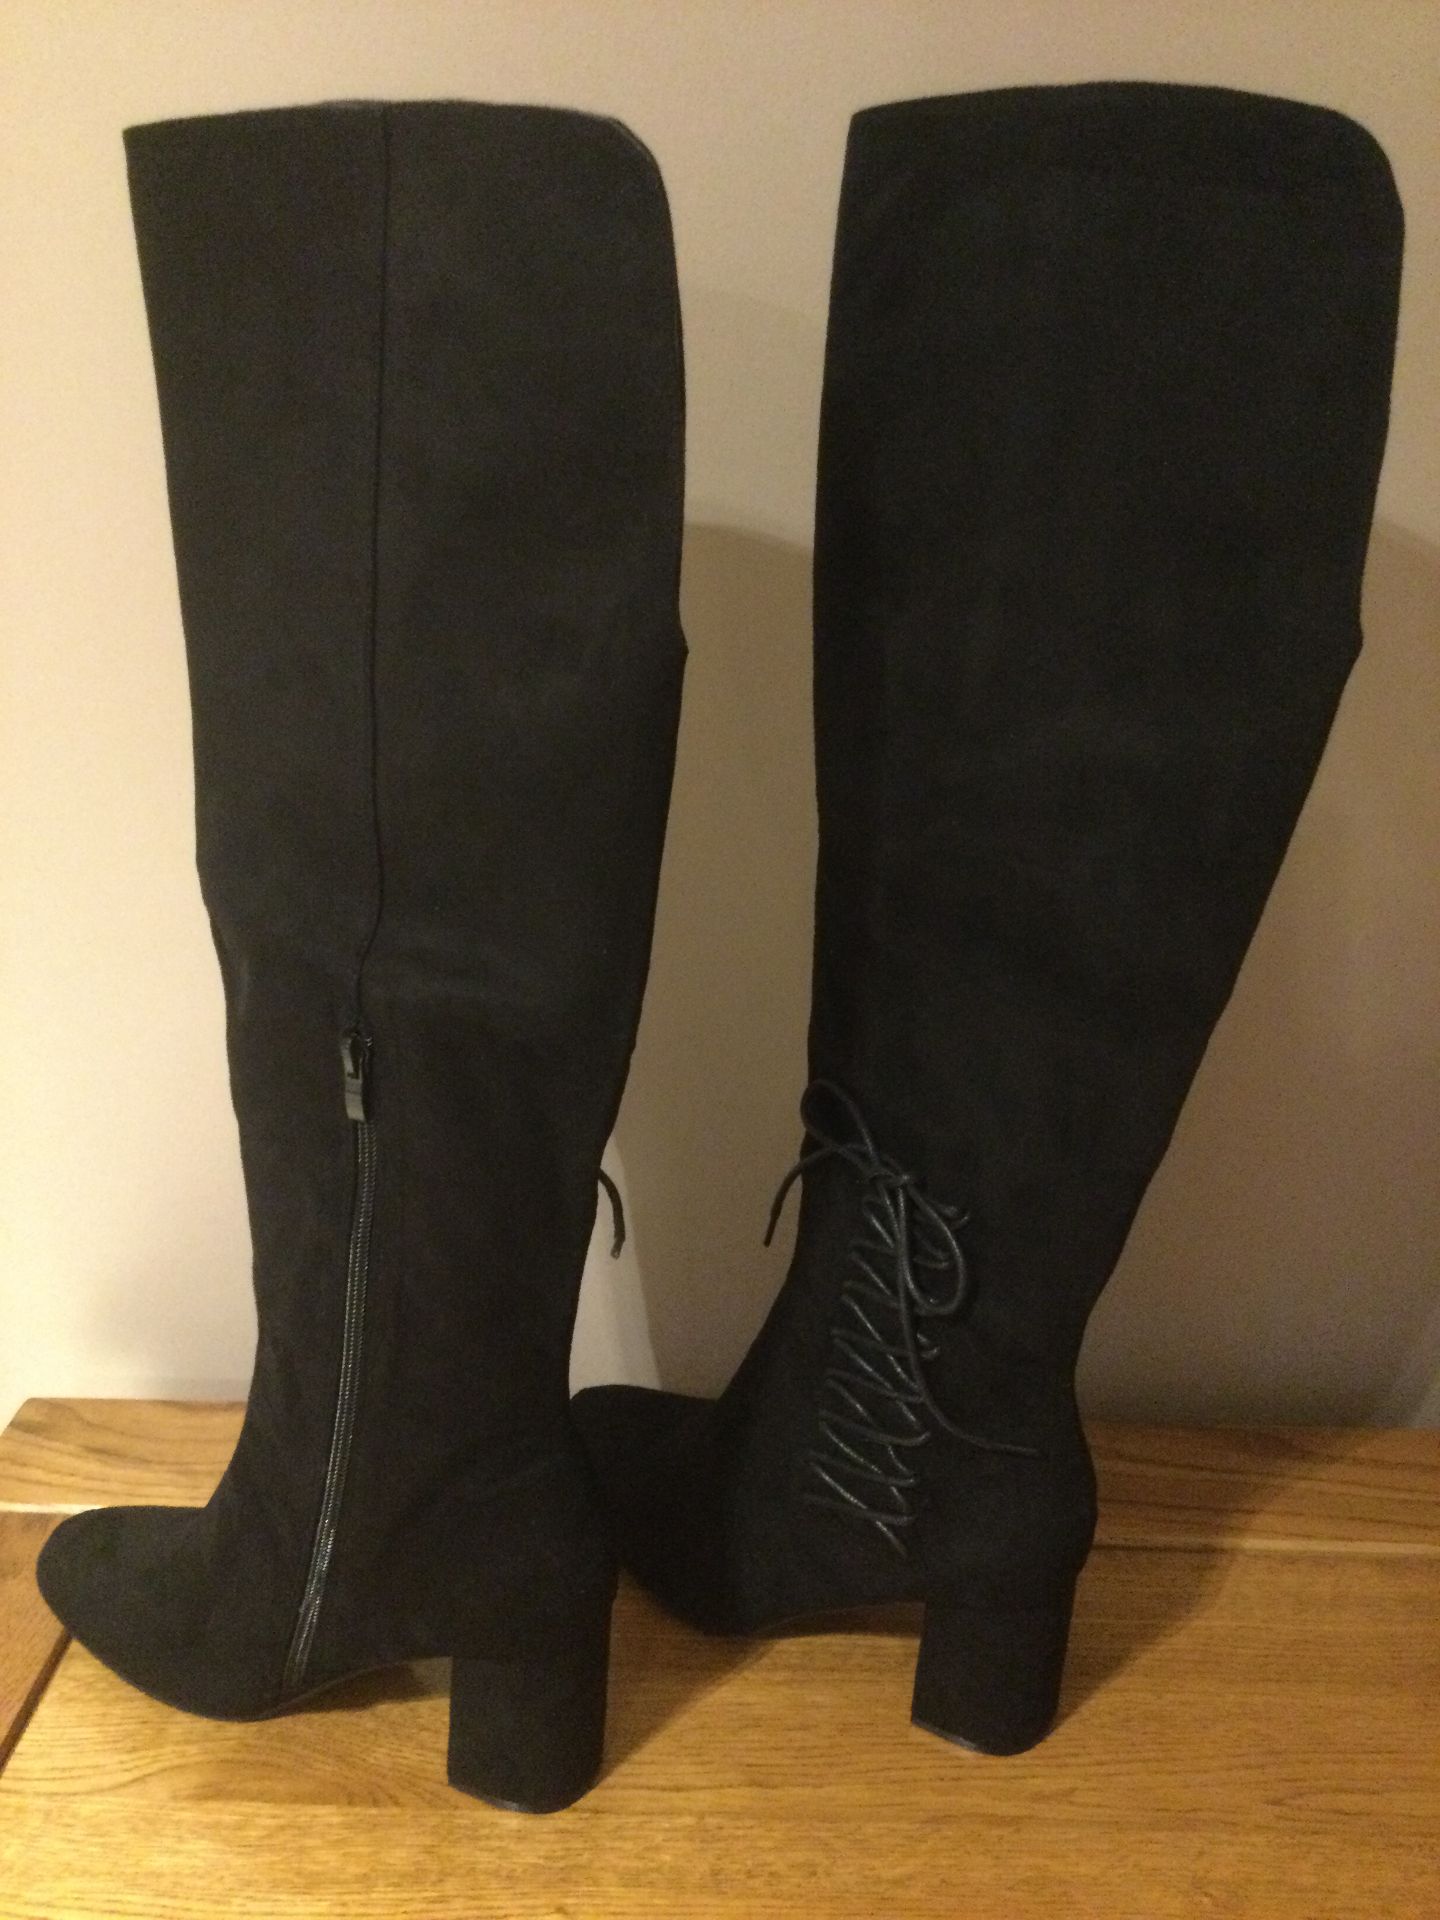 Dolcis “Emma” Long Boots, Block Heel, Size 6, Black - New RRP £55.00 - Image 2 of 7